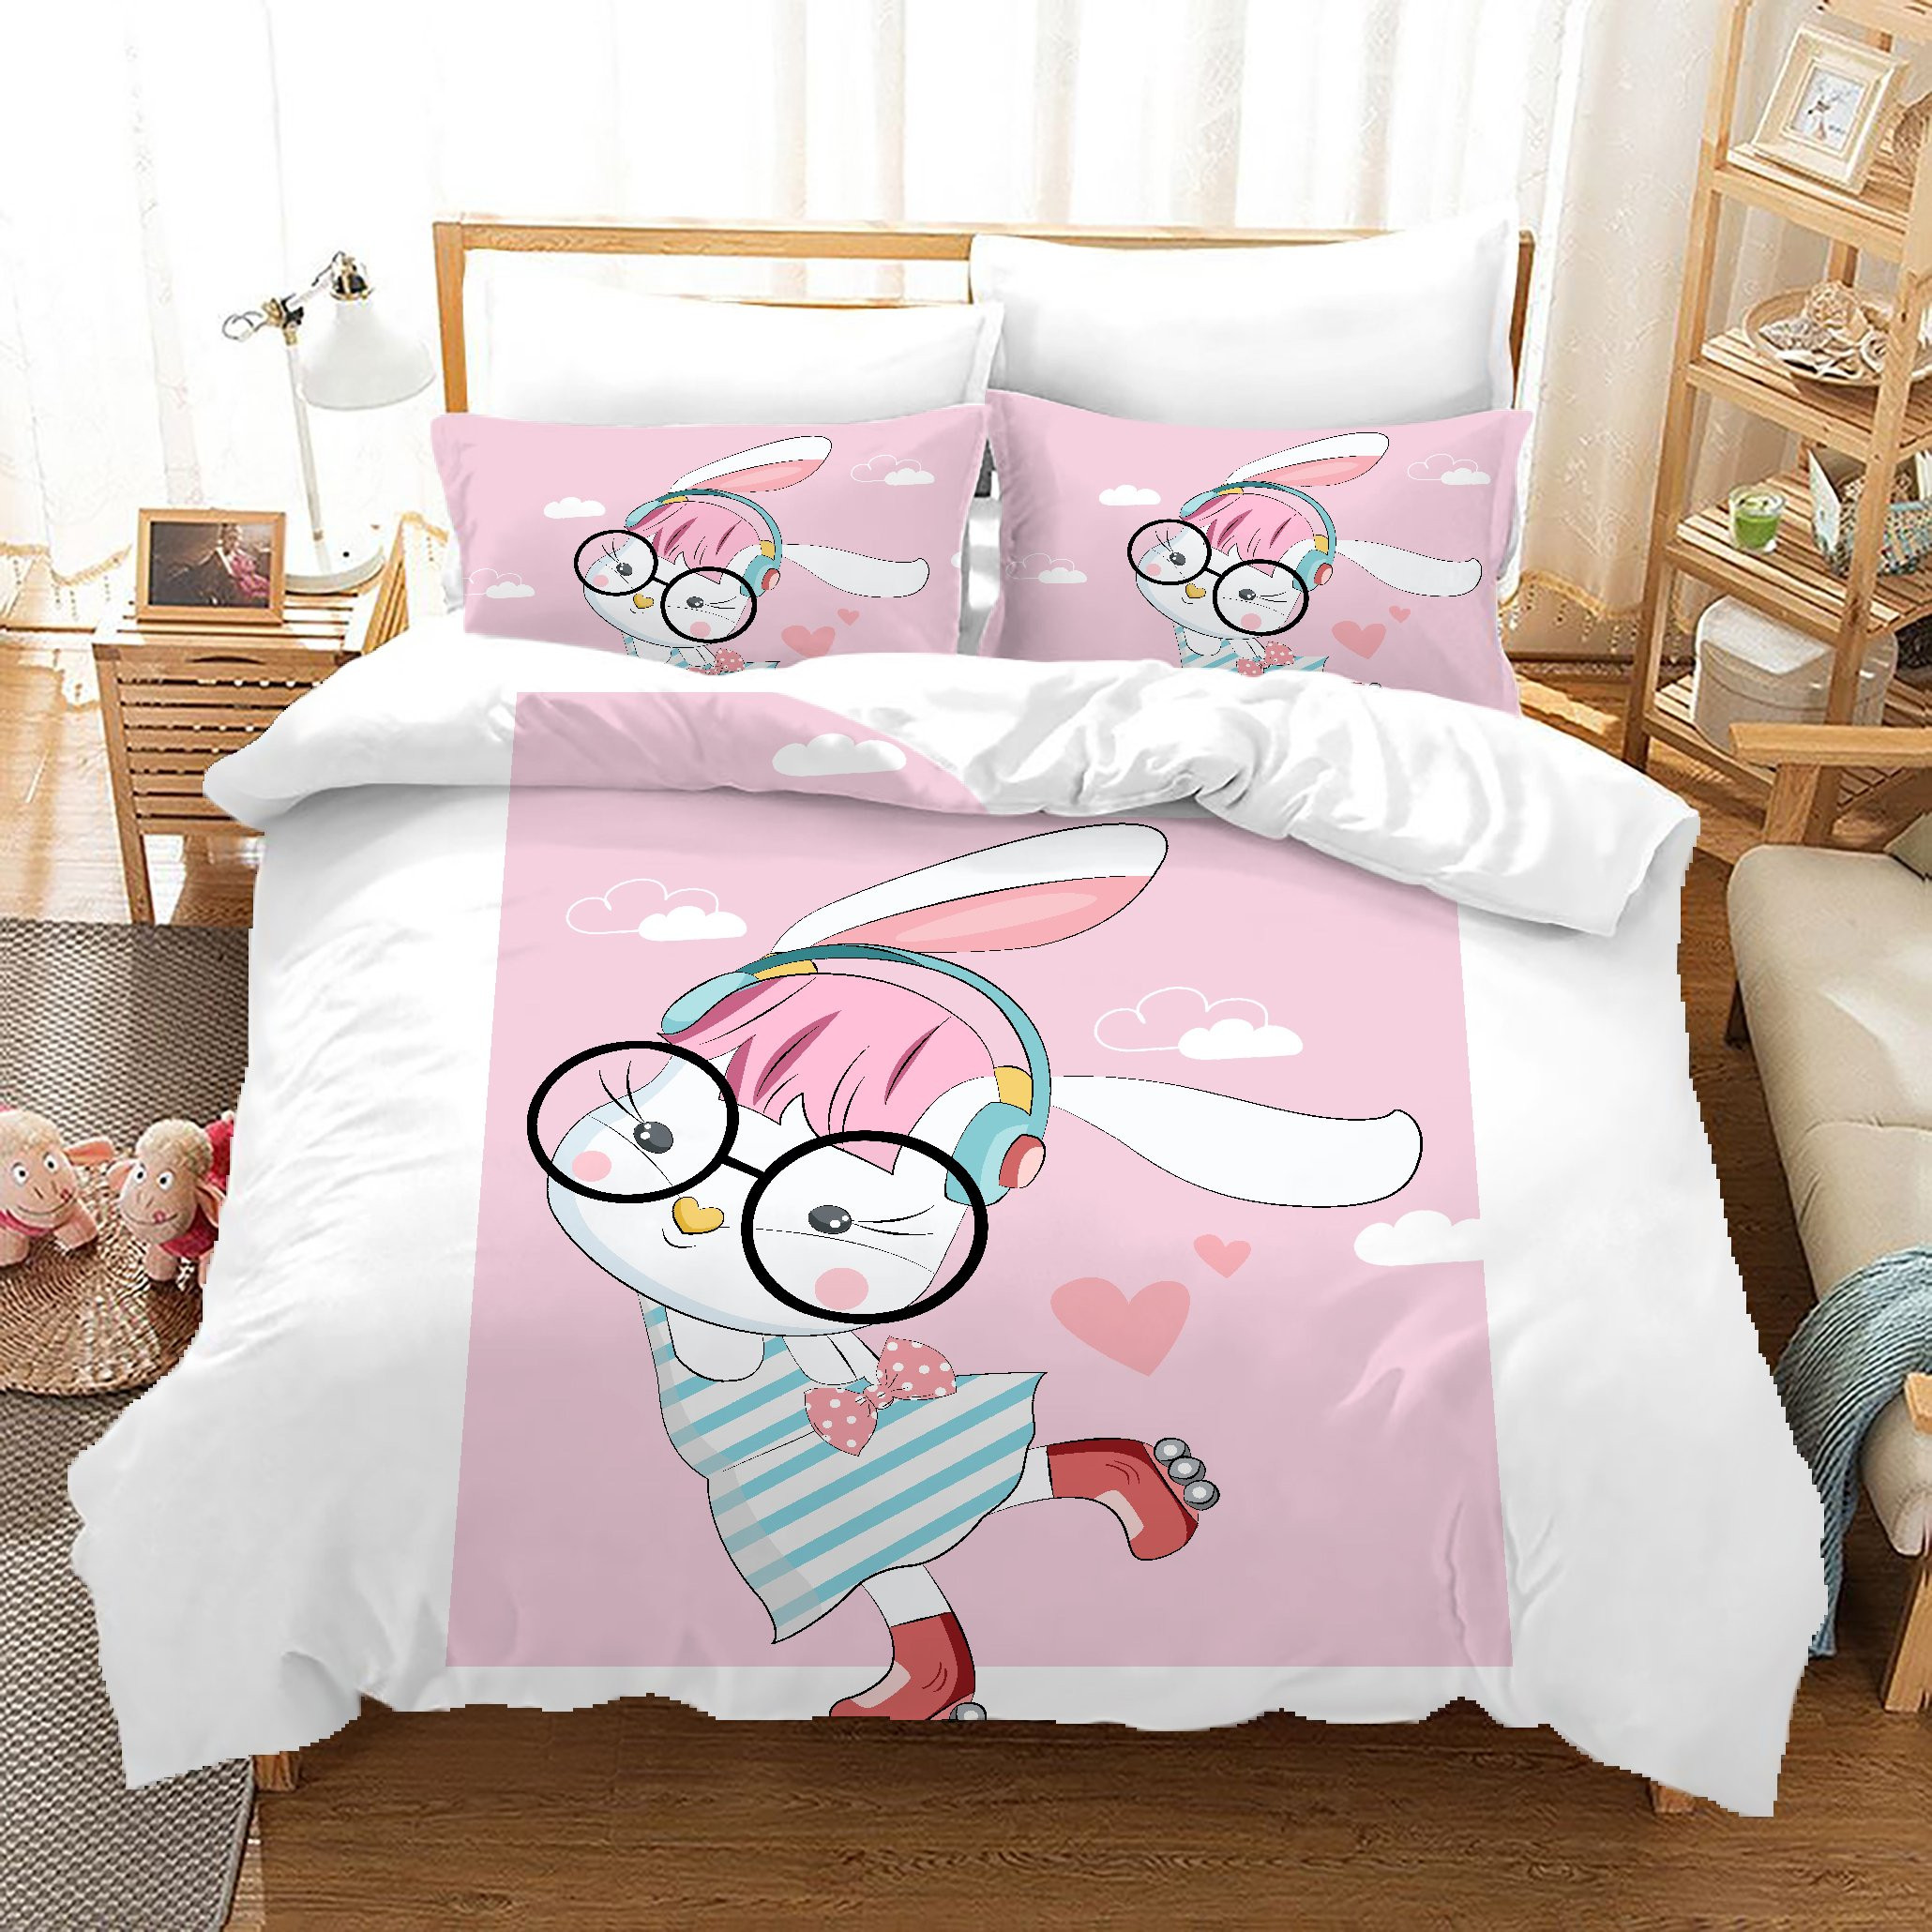 3d bunny pink quilt cover bed set duvet pillowcases a629 lqh rznjj